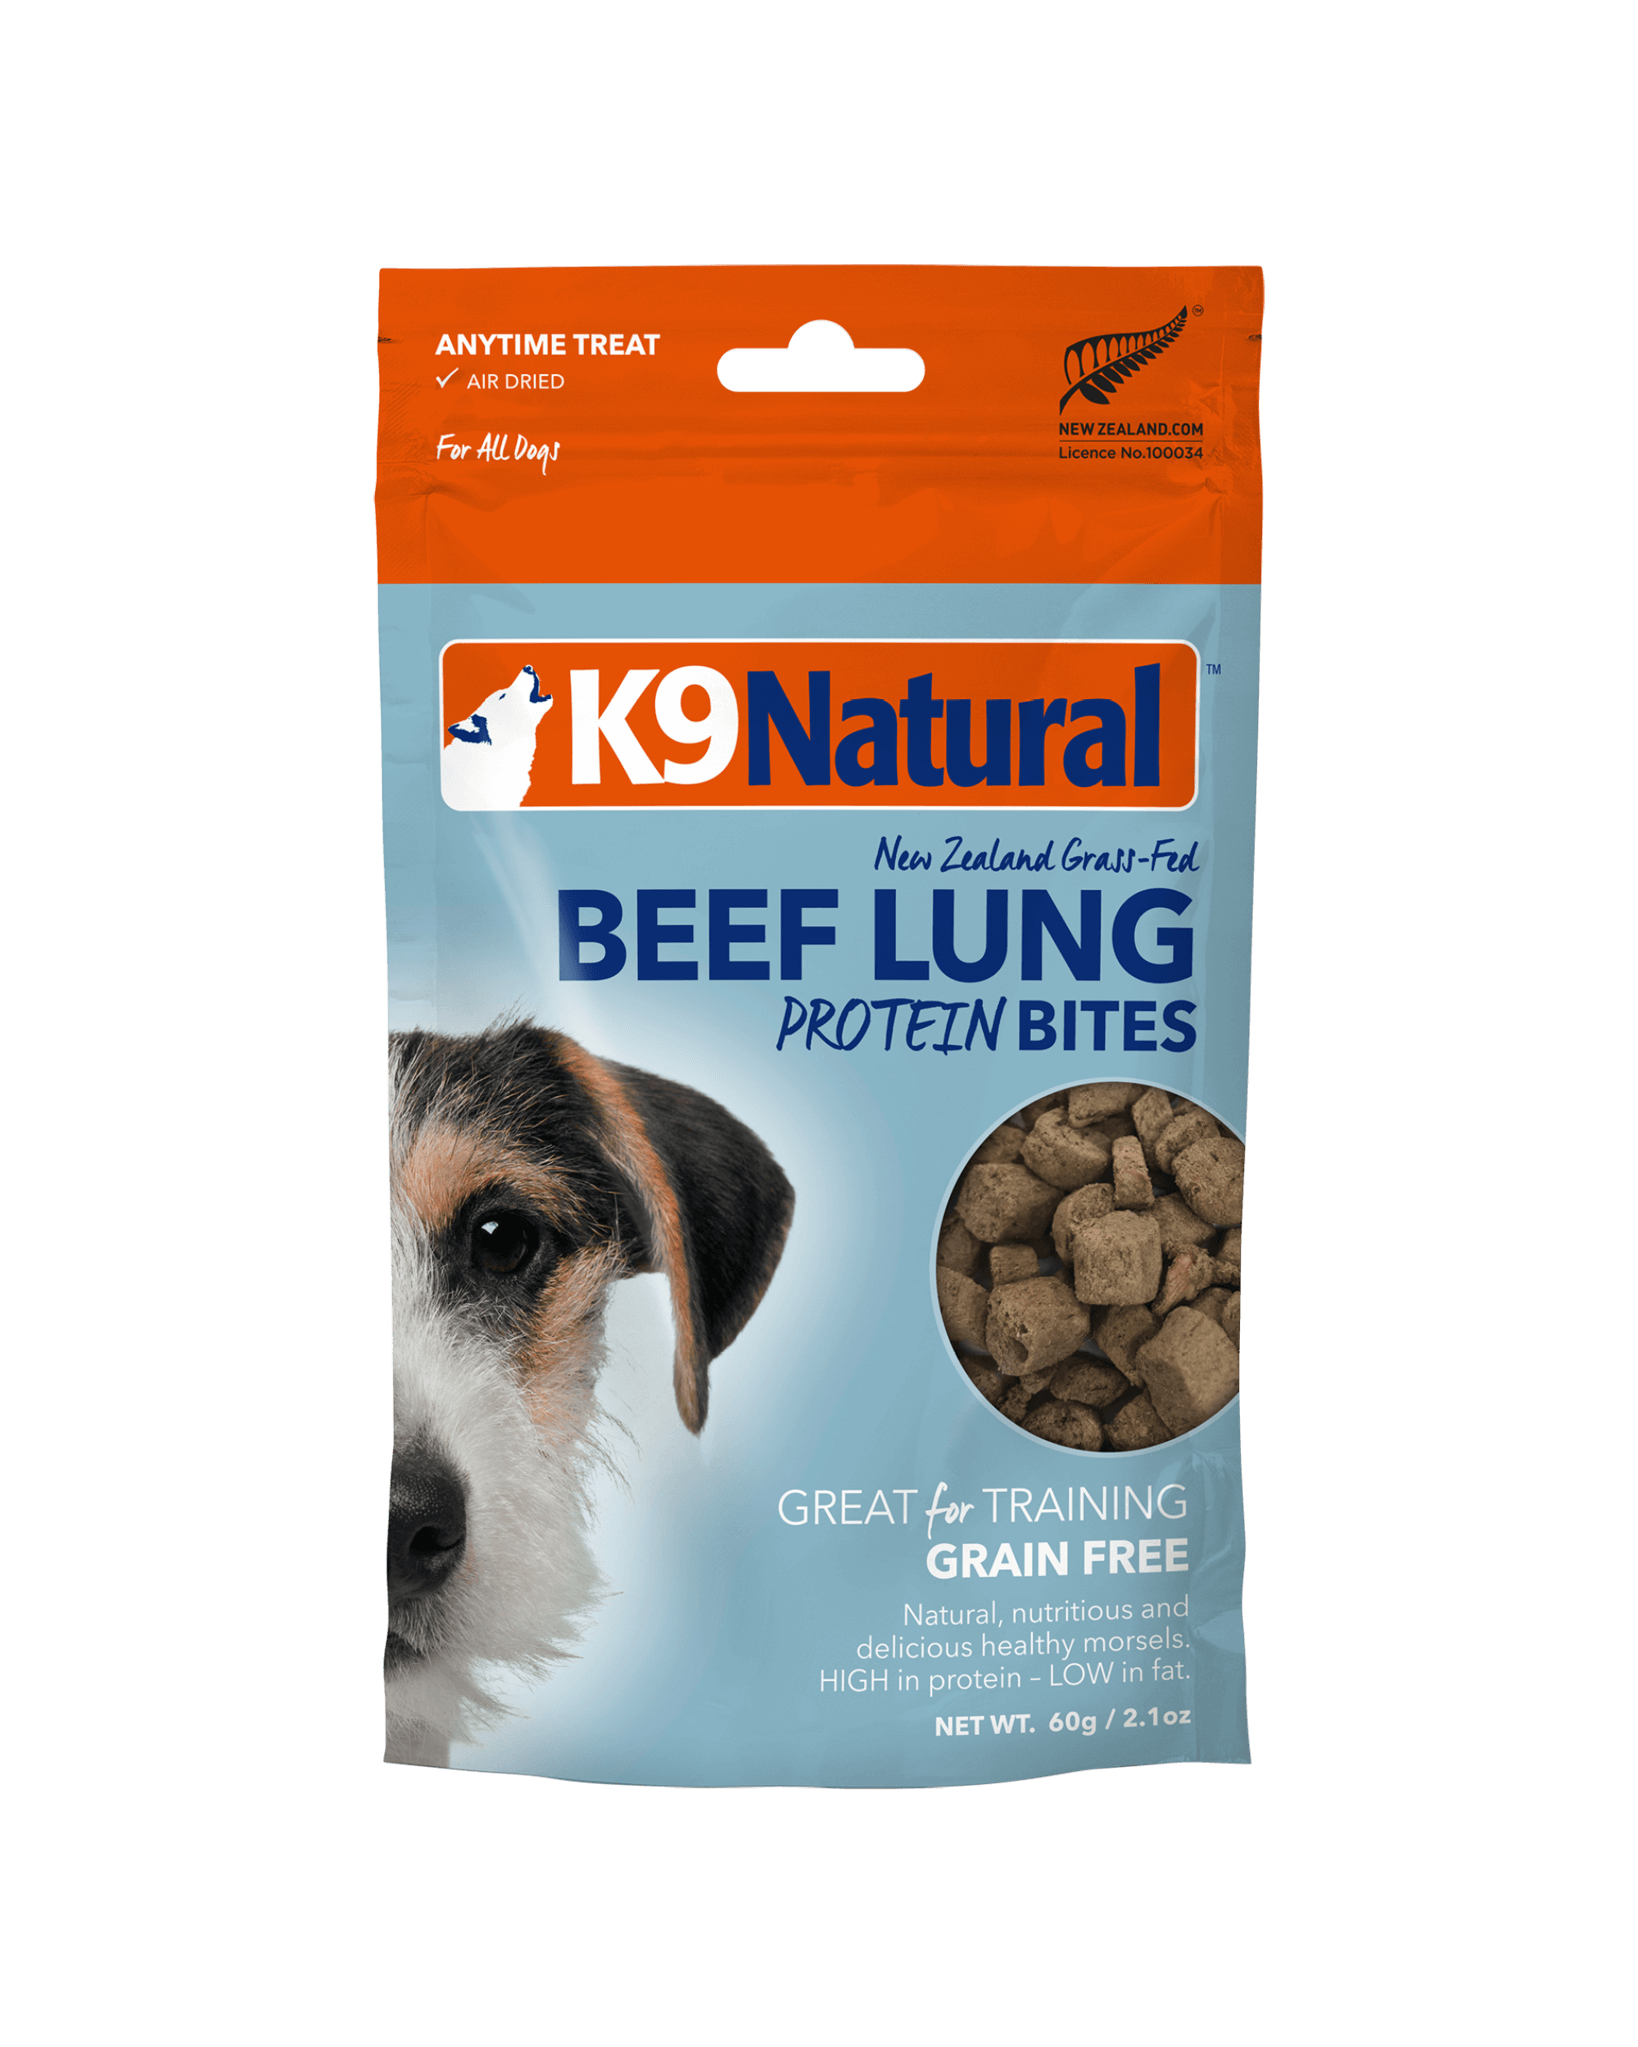 K9 Natural - Air Dried Beef Lung Protein Bites